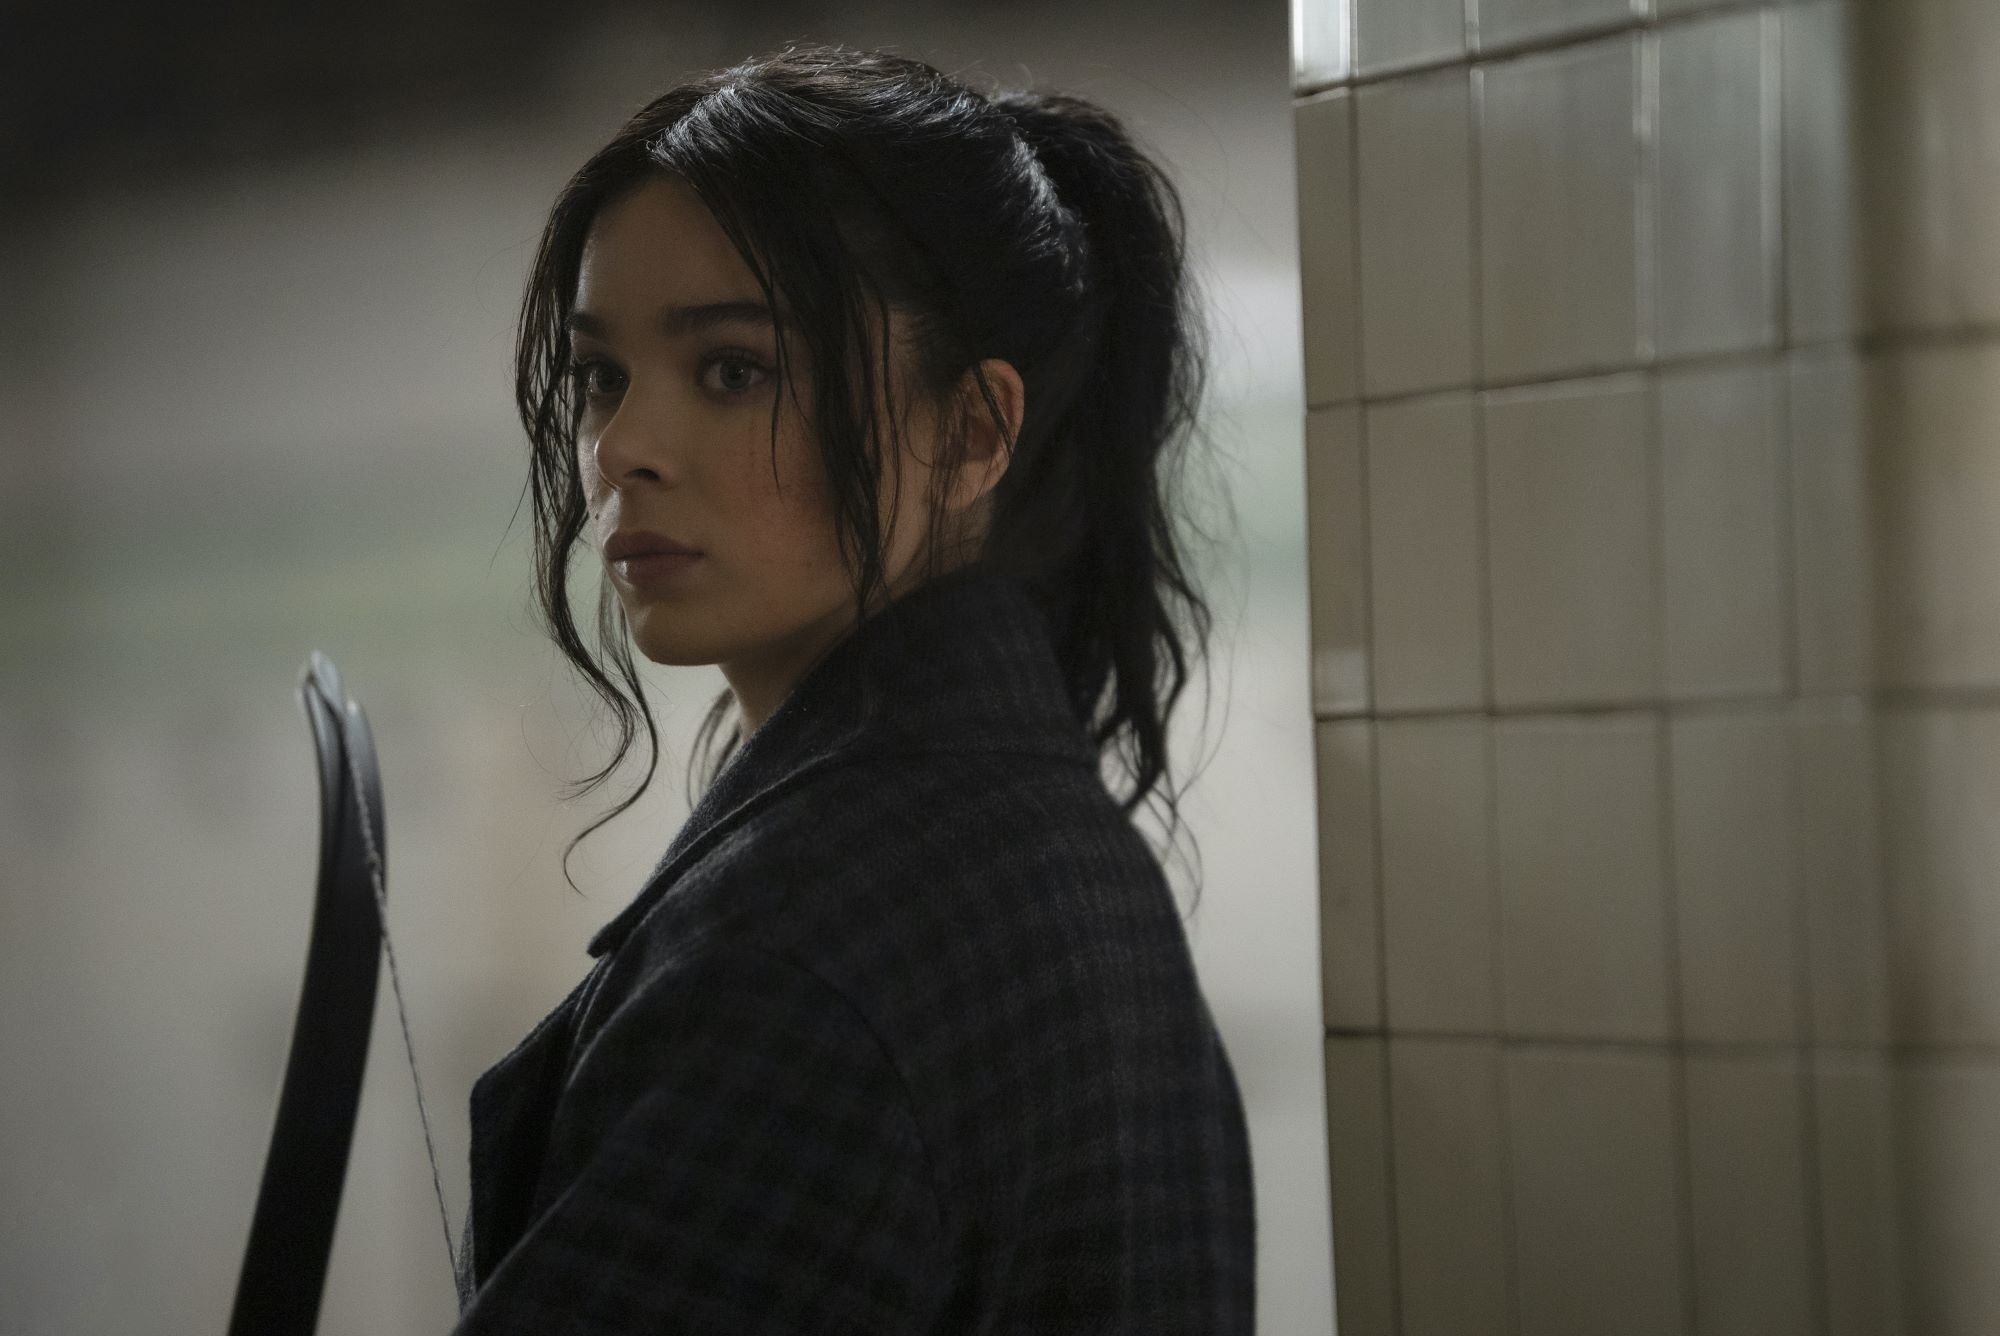 'Hawkeye' Episode 5 star Hailee Steinfeld, in character as Kate Bishop, wears a gray plaid coat and holds a bow. Kingpin appears in 'Hawkeye' Episode 5.